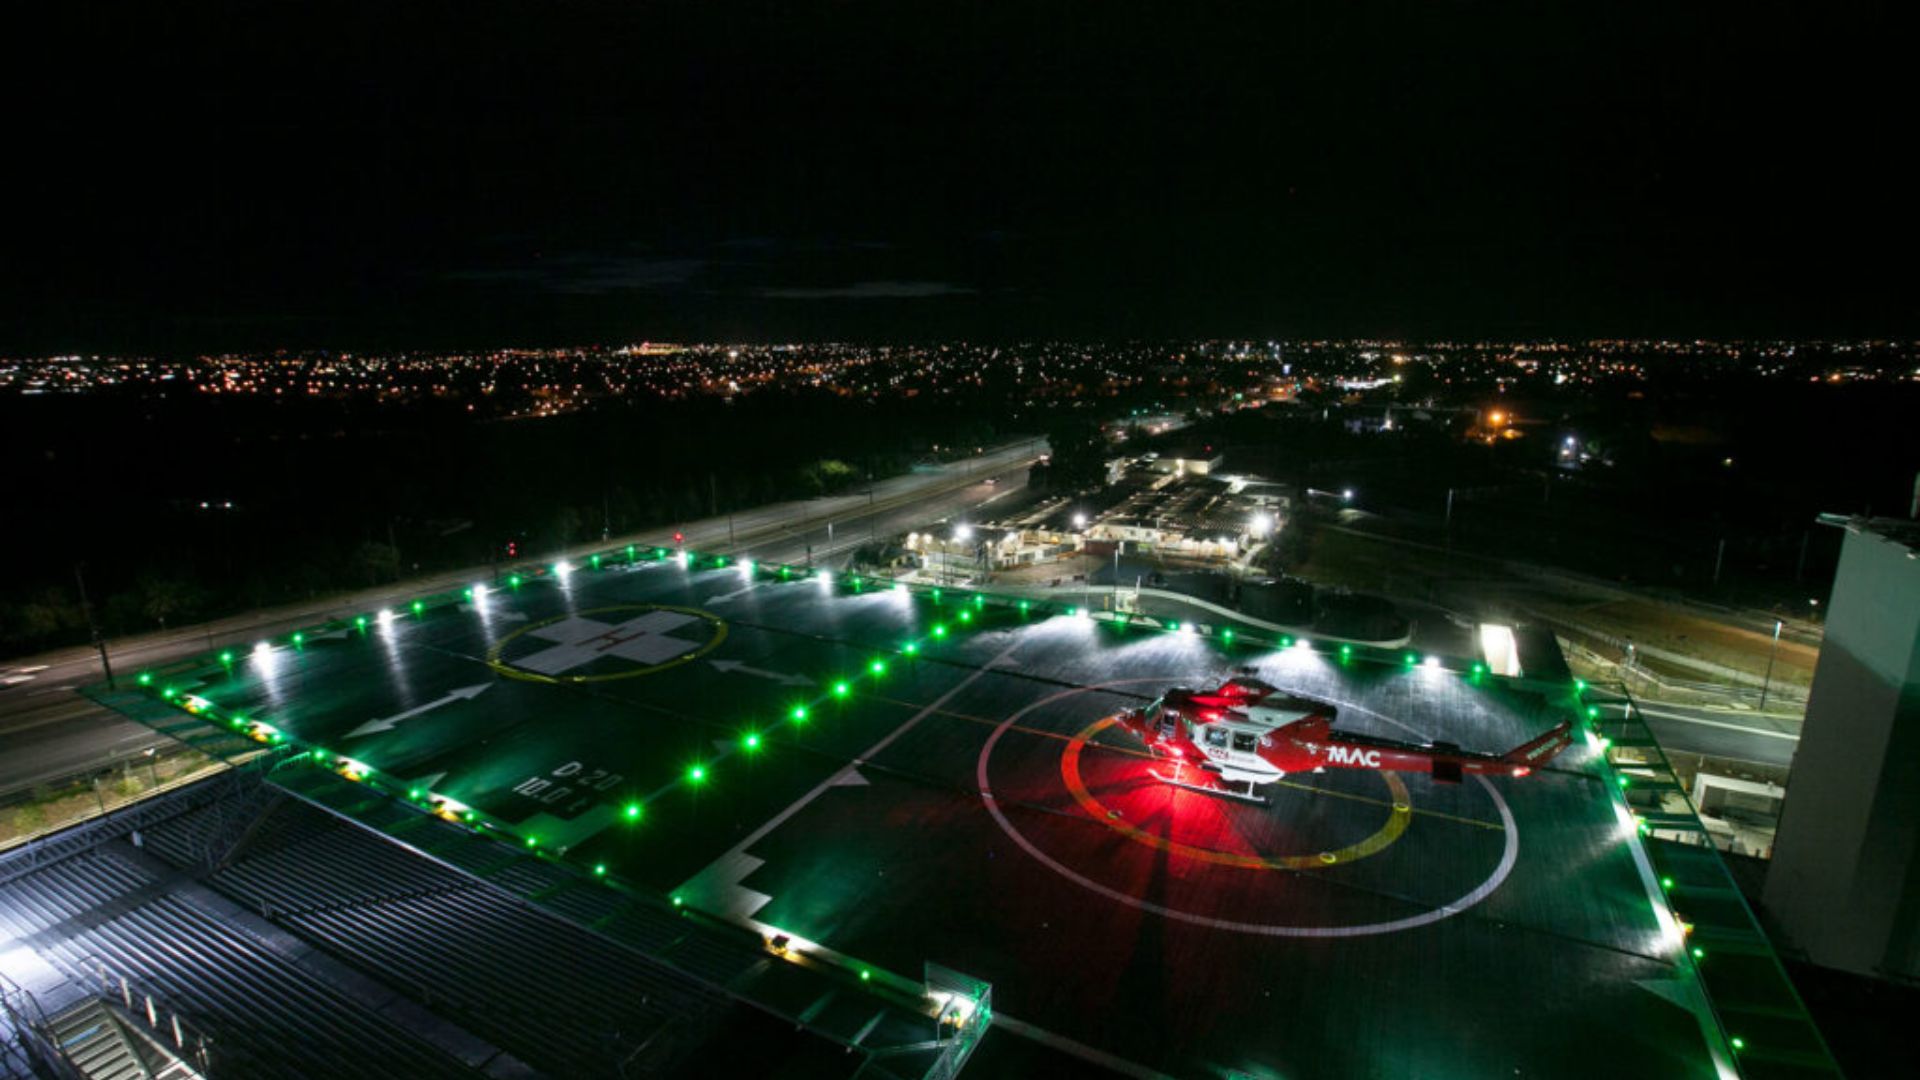 Why Hеlipad Lights arе Essеntial for Modеrn Aviation Safеty?